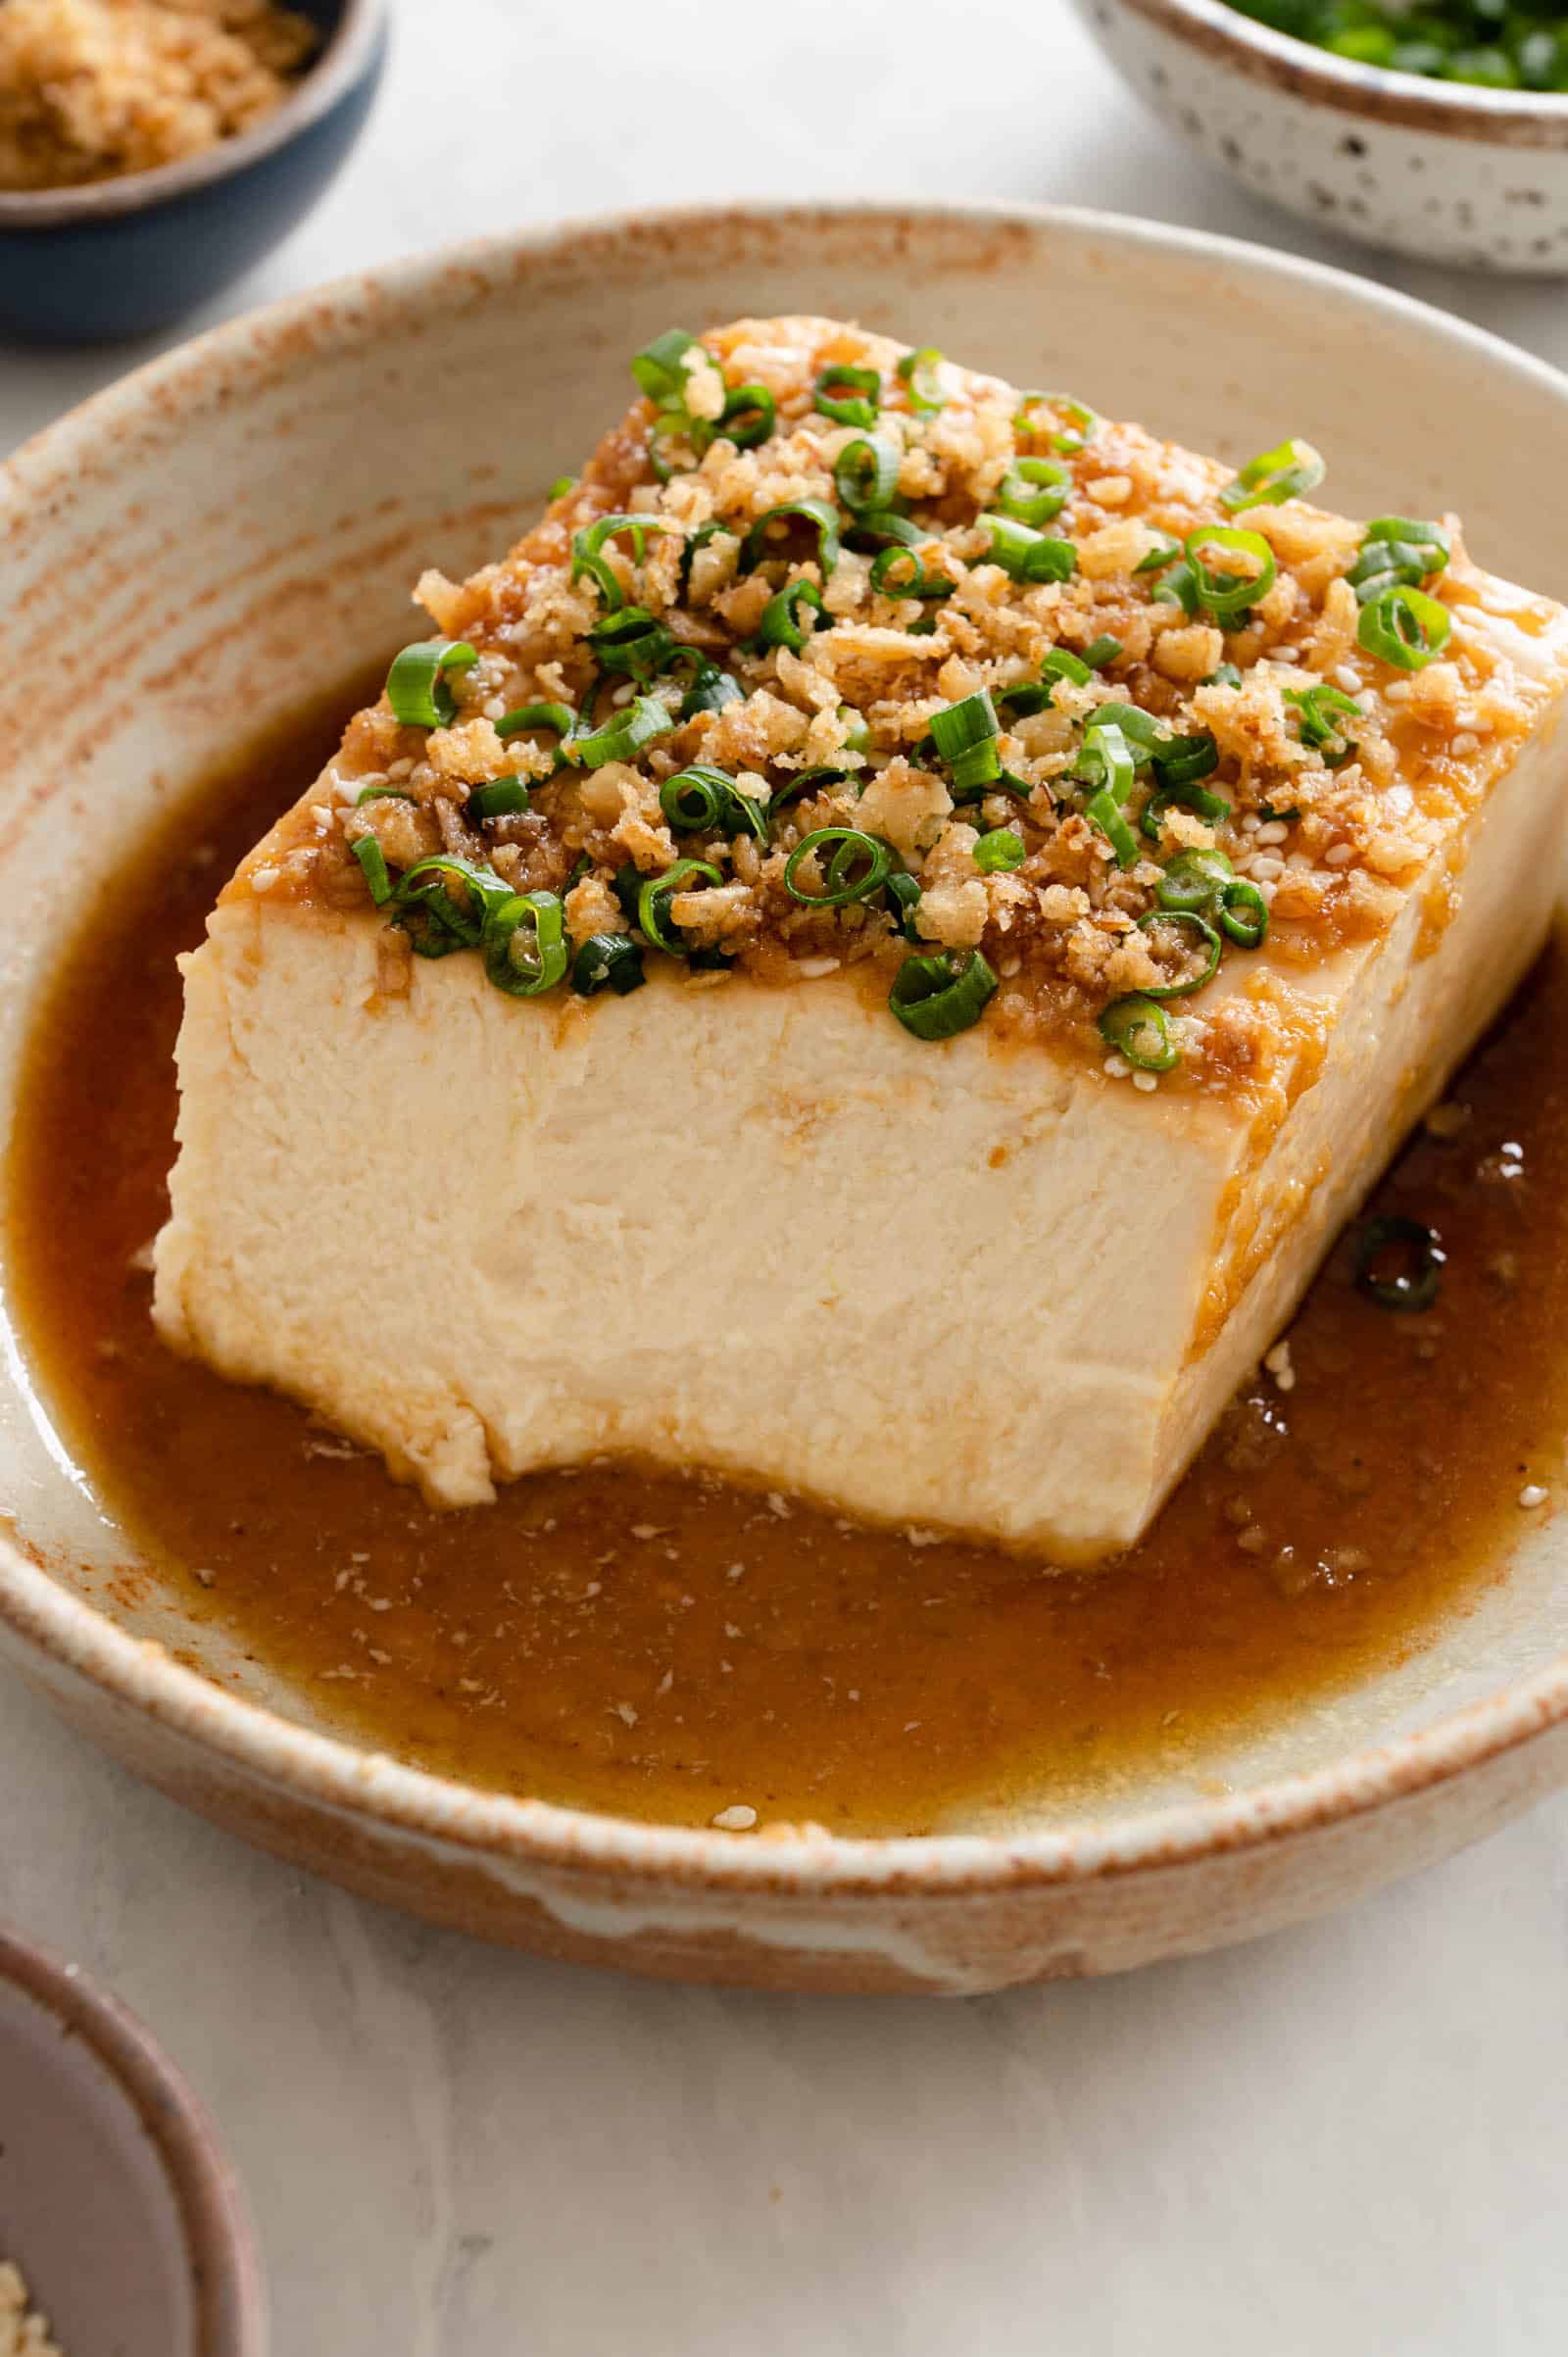 Cold Tofu in a Tangy & Garlicky Sauce